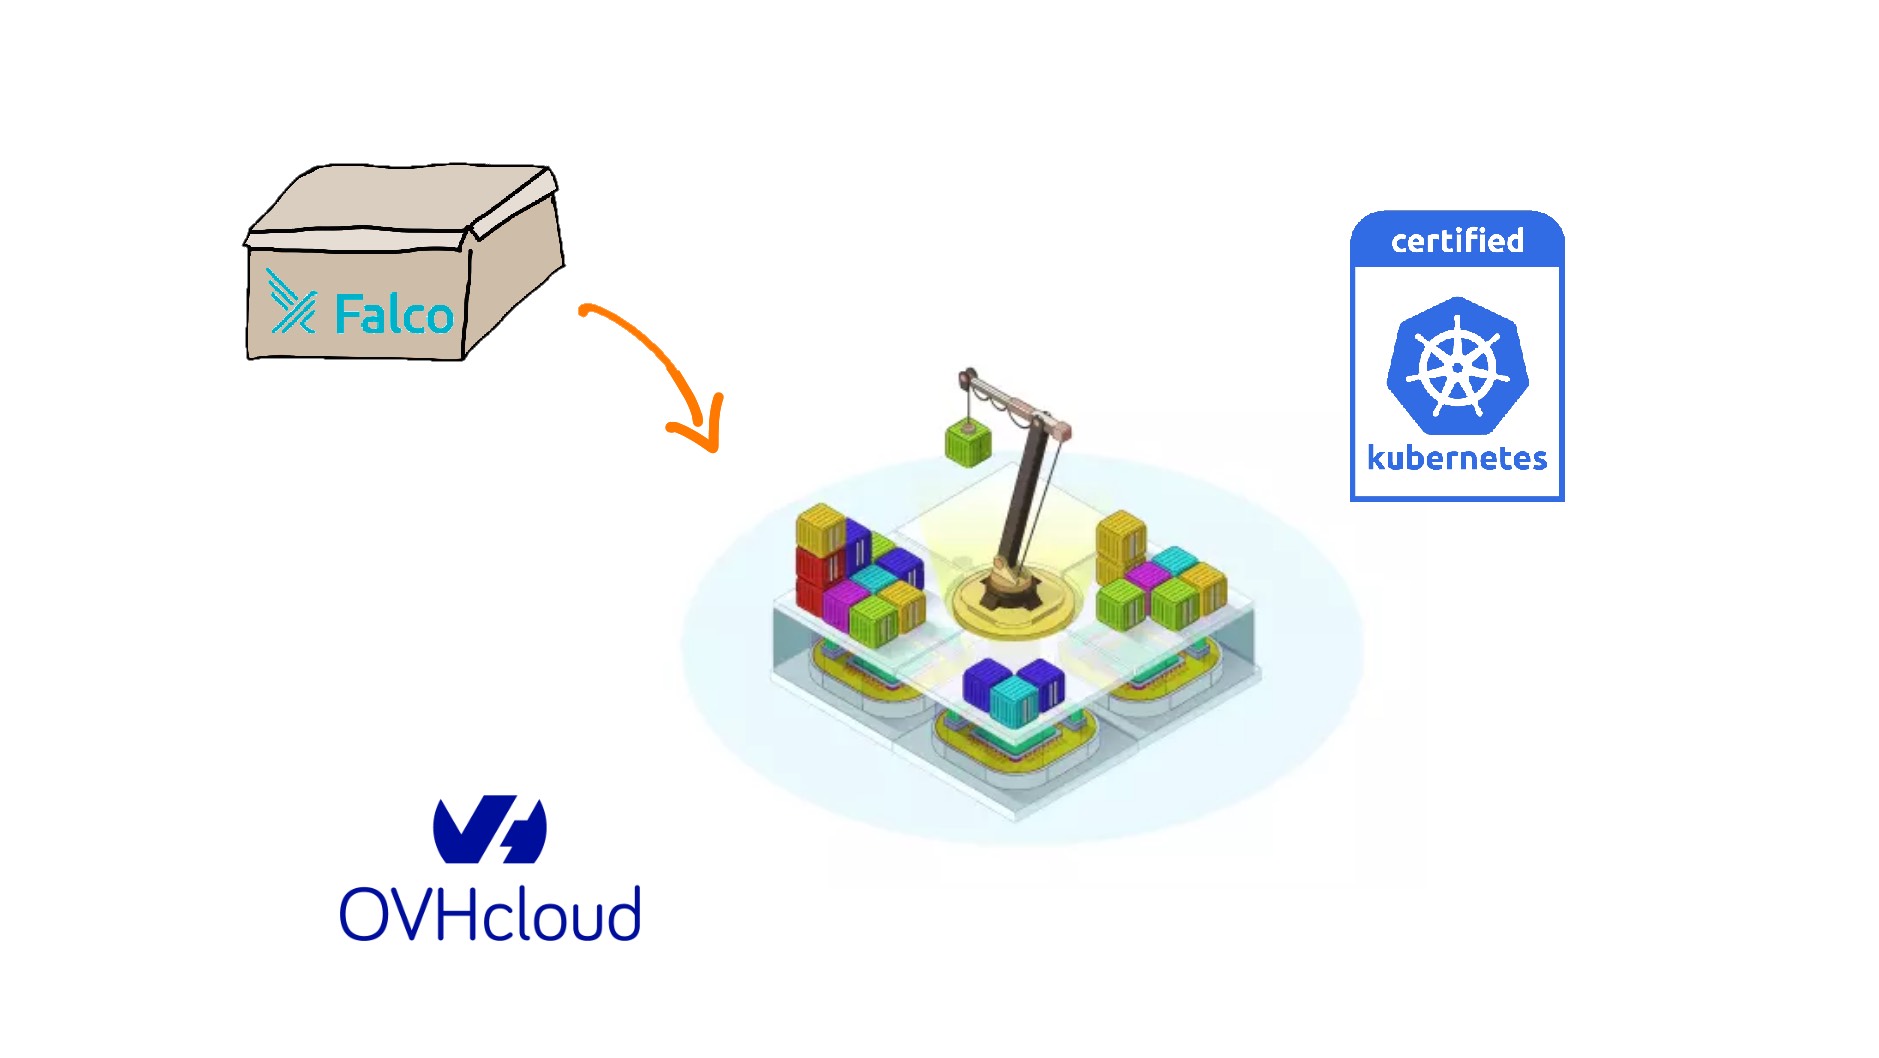 Near real-time threats detection with Falco on OVHcloud Managed Kubernetes